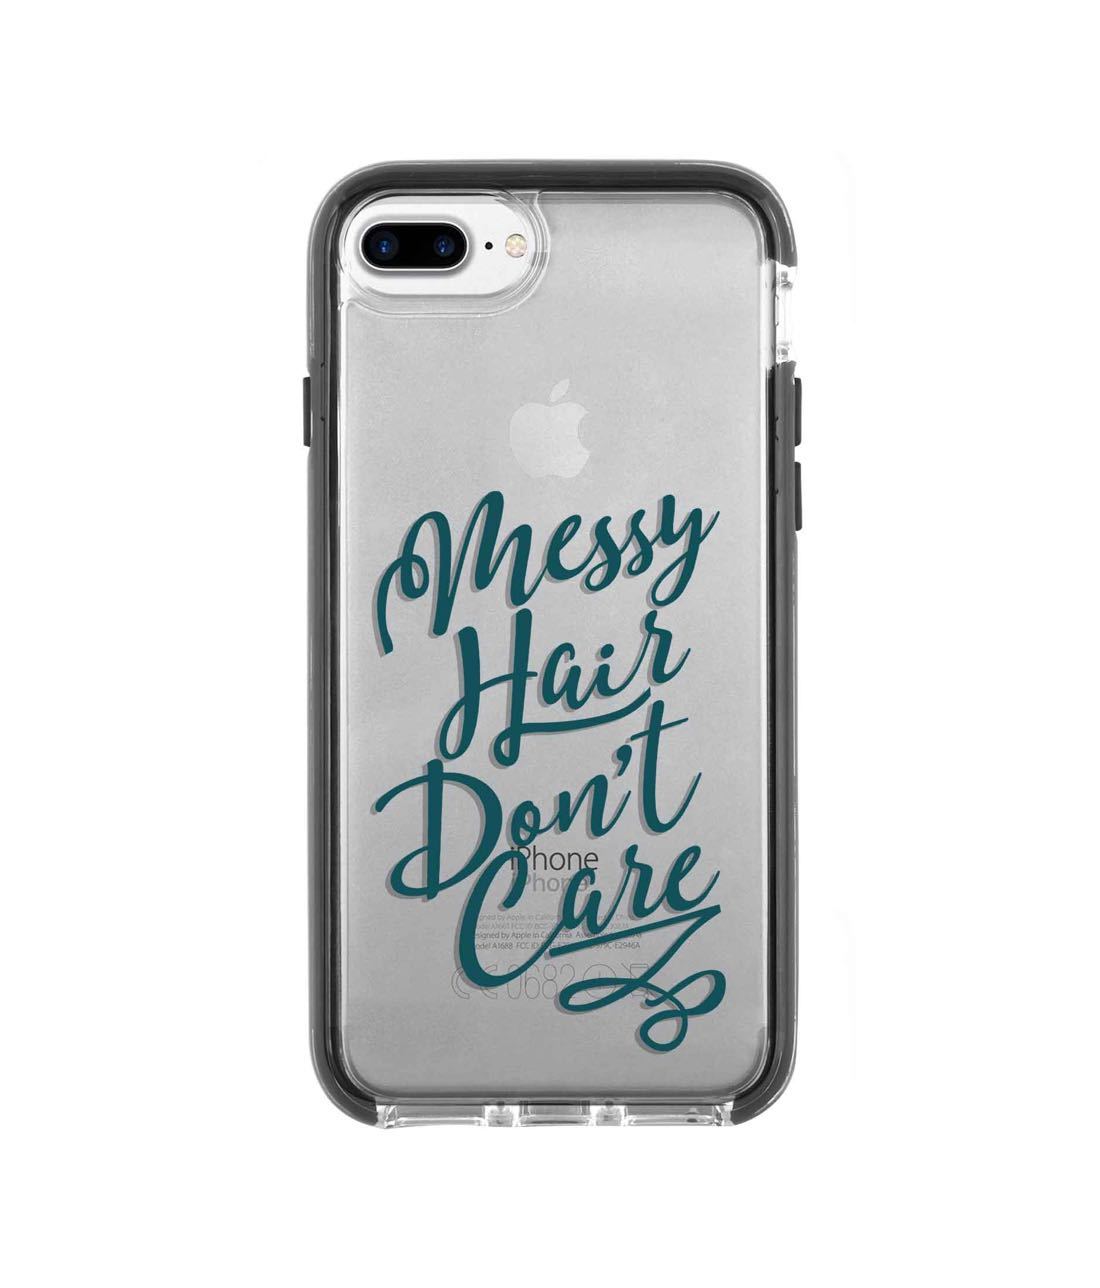 Messy Hair Dont Care - Extreme Phone Case for iPhone 7 Plus